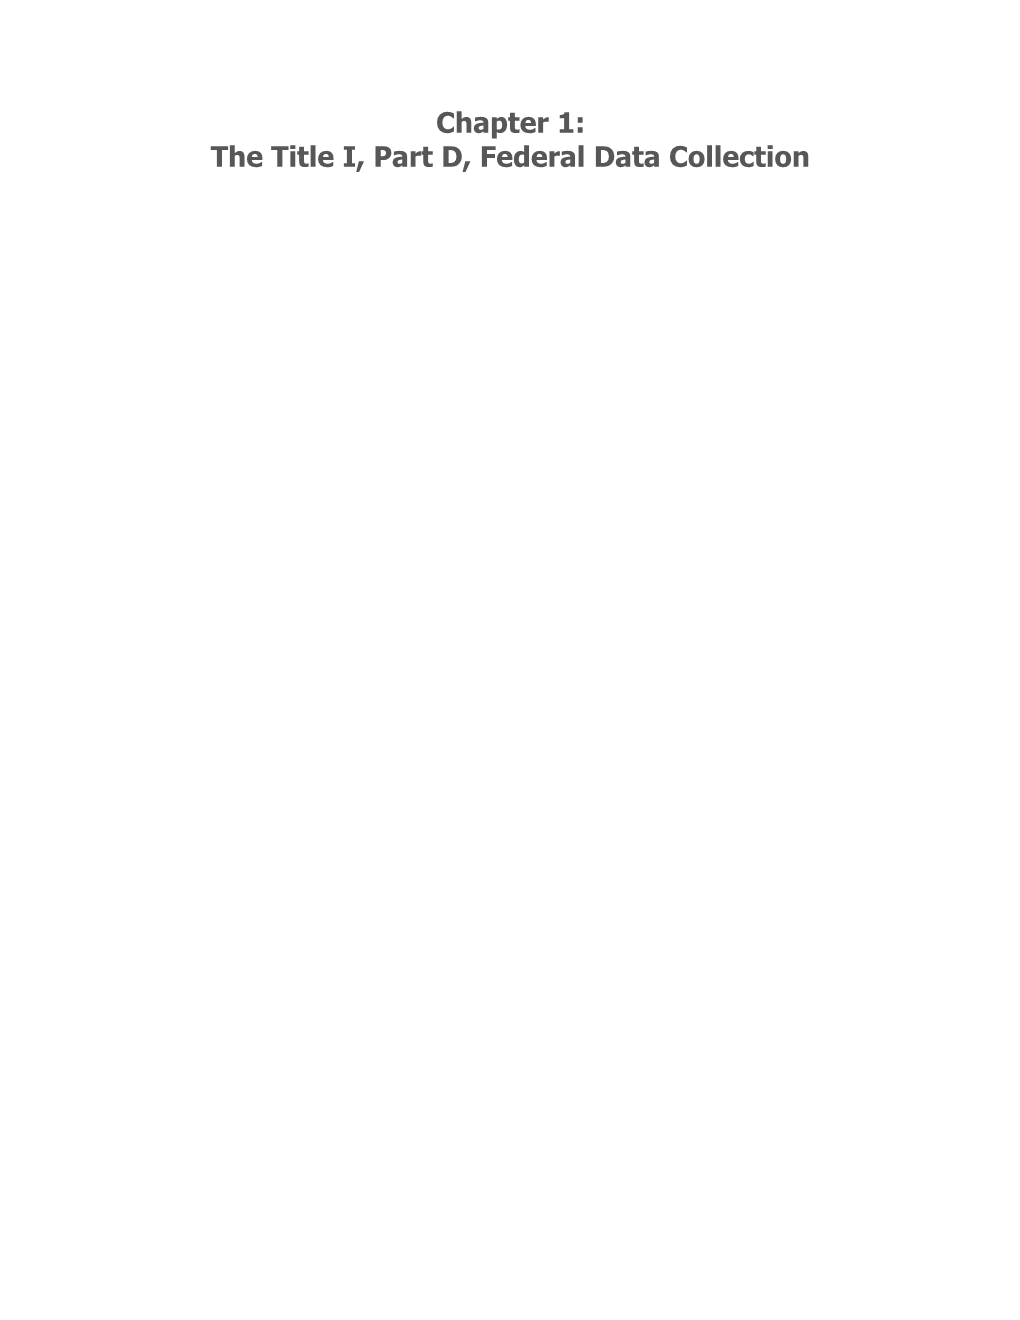 Instructional Guide to Reporting Title I, Part D Data in the CSPR for 2010 11